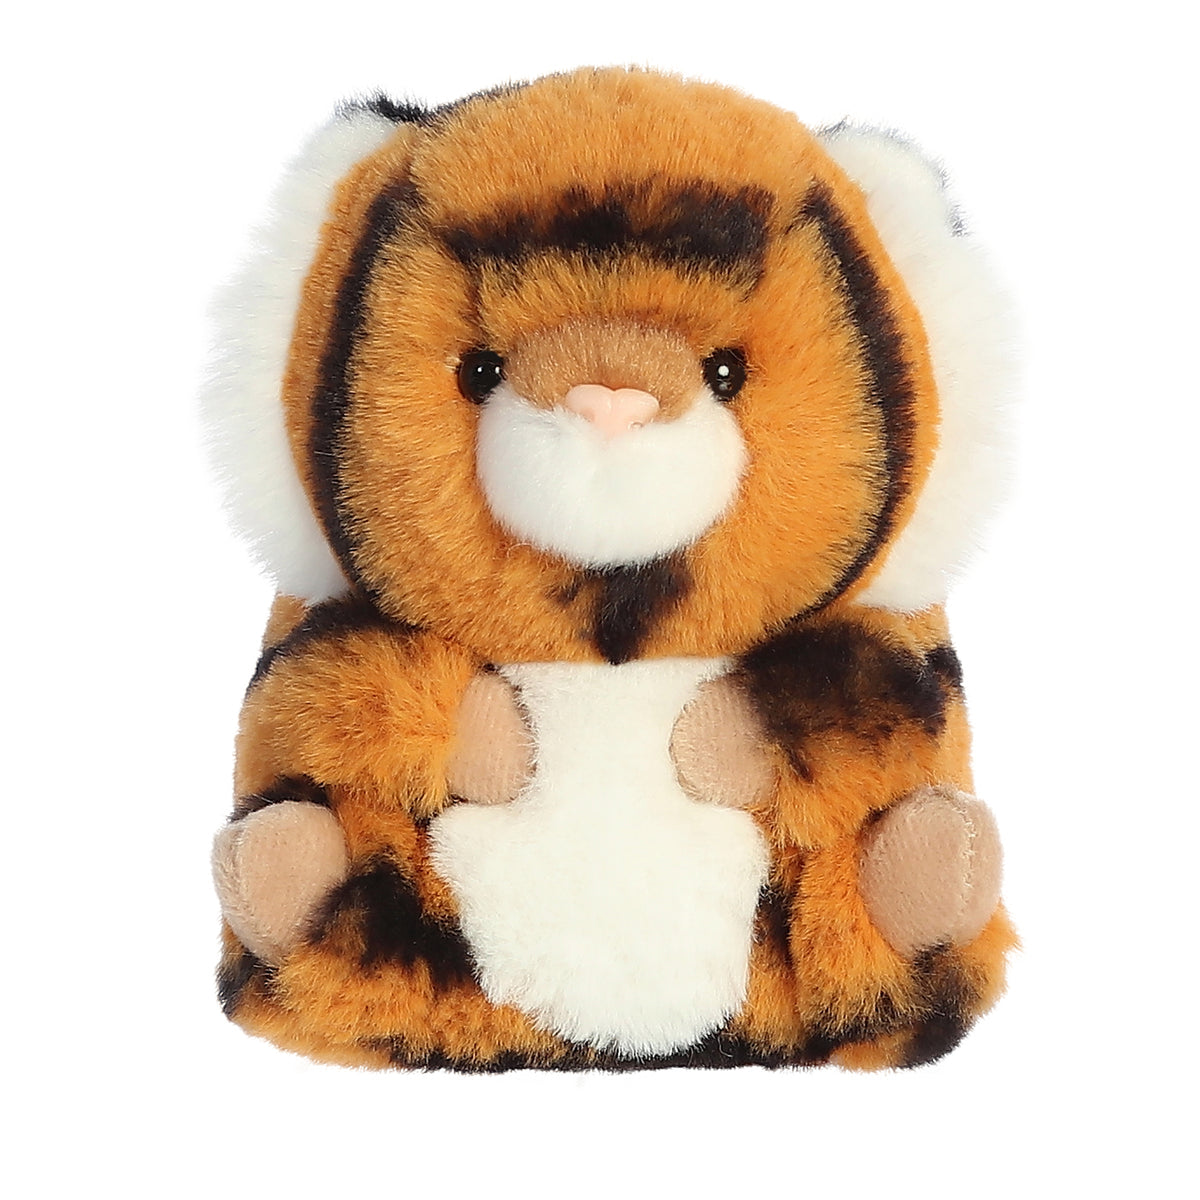 A Tiger plush with bright orange and black stripes and charming white-accented ears, with arms around the tummy and legs up.